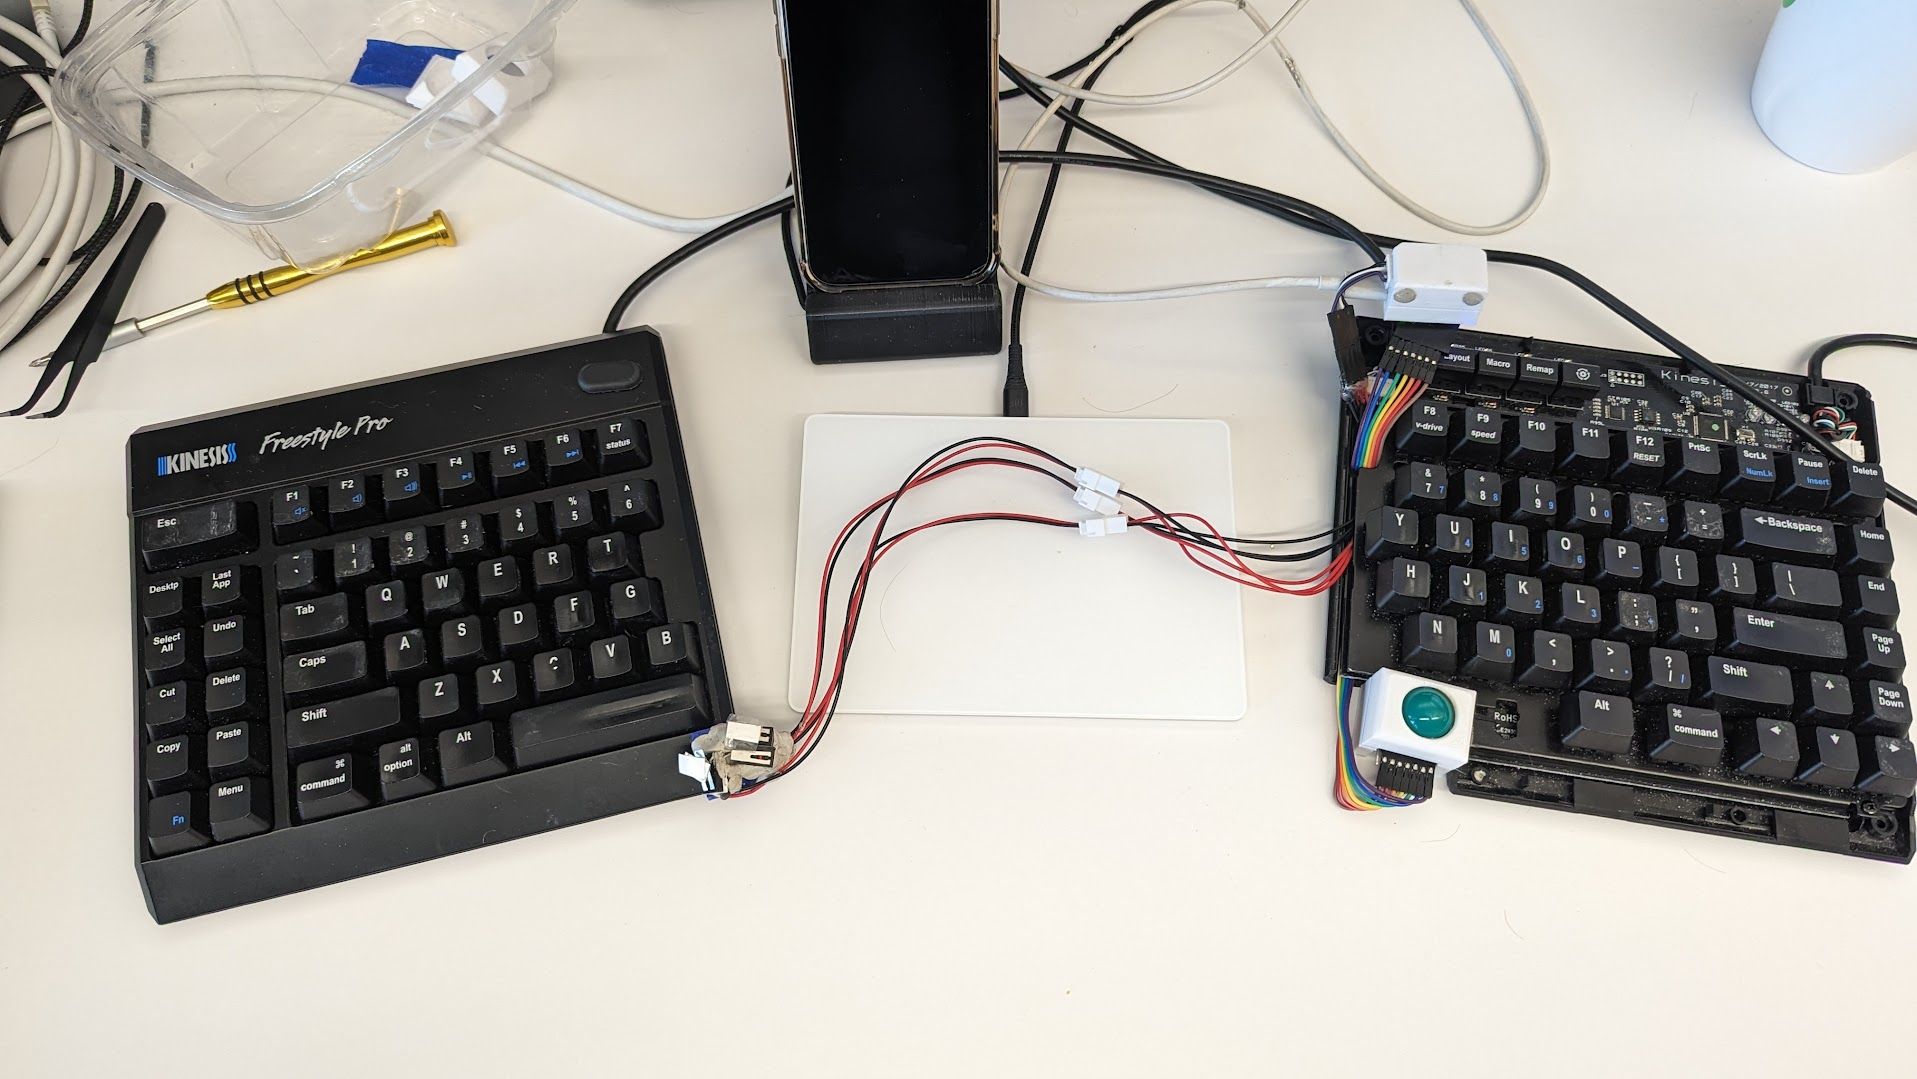 A hacked together prototype of a split keyboard with a trackball replacing the right spacebar.